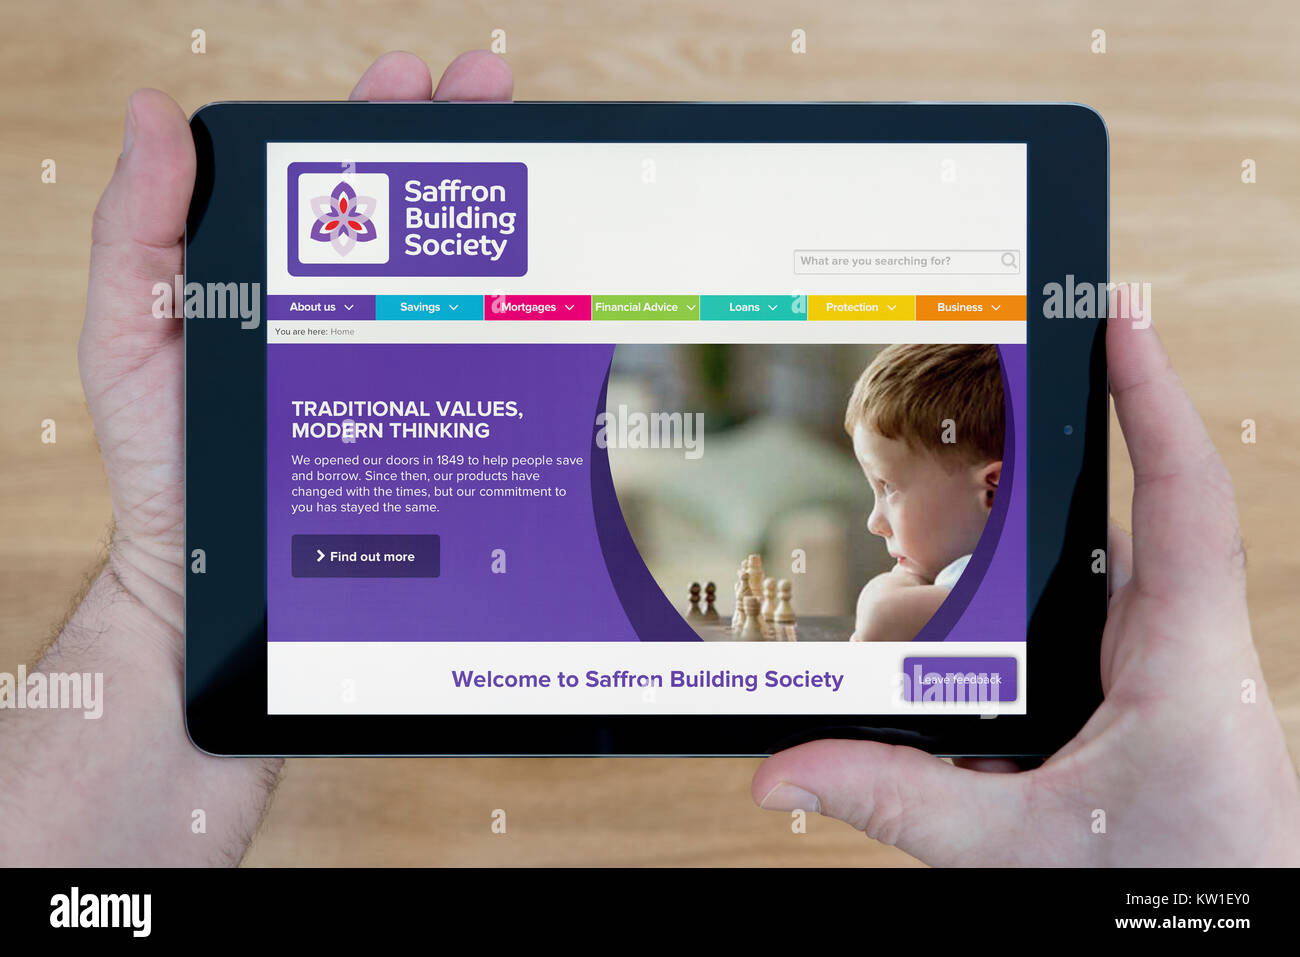 A man looks at the Saffron Building Society website on his iPad tablet device, shot against a wooden table top background (Editorial use only) Stock Photo